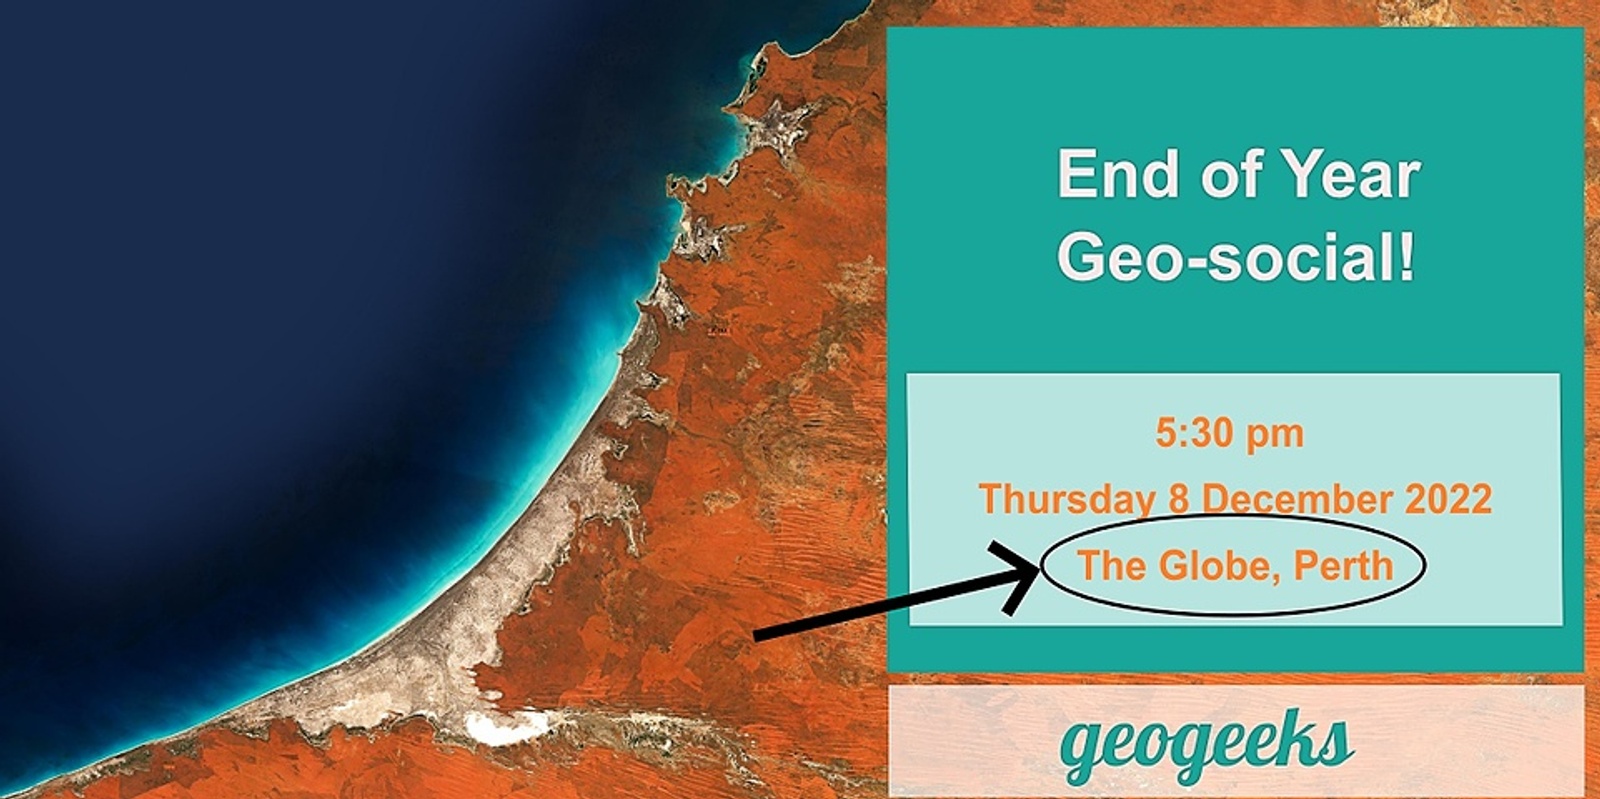 Banner image for Geogeeks End of Year Geo-social